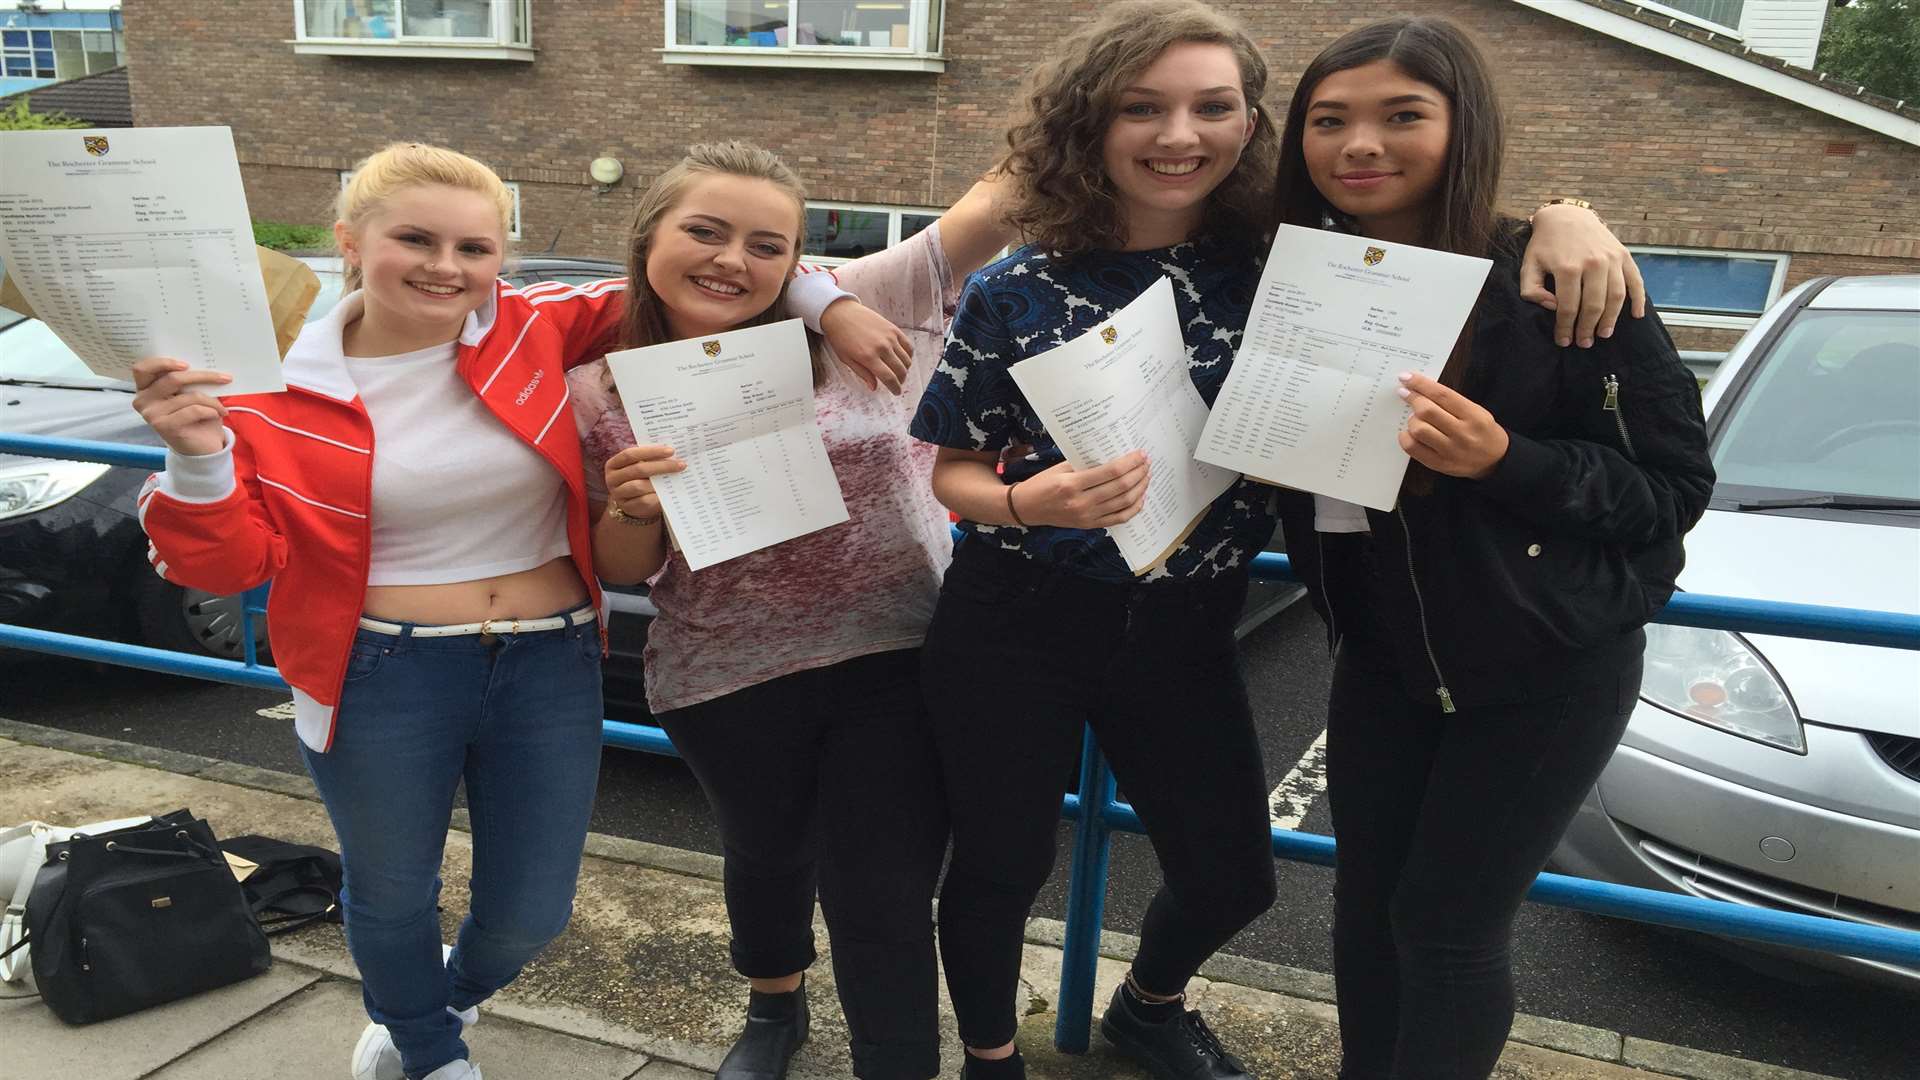 Rochester Grammar School pupils Eleanor Brockwell, Ellie Smith, Imogen Munday and Jasmine Tang with their GCSE results